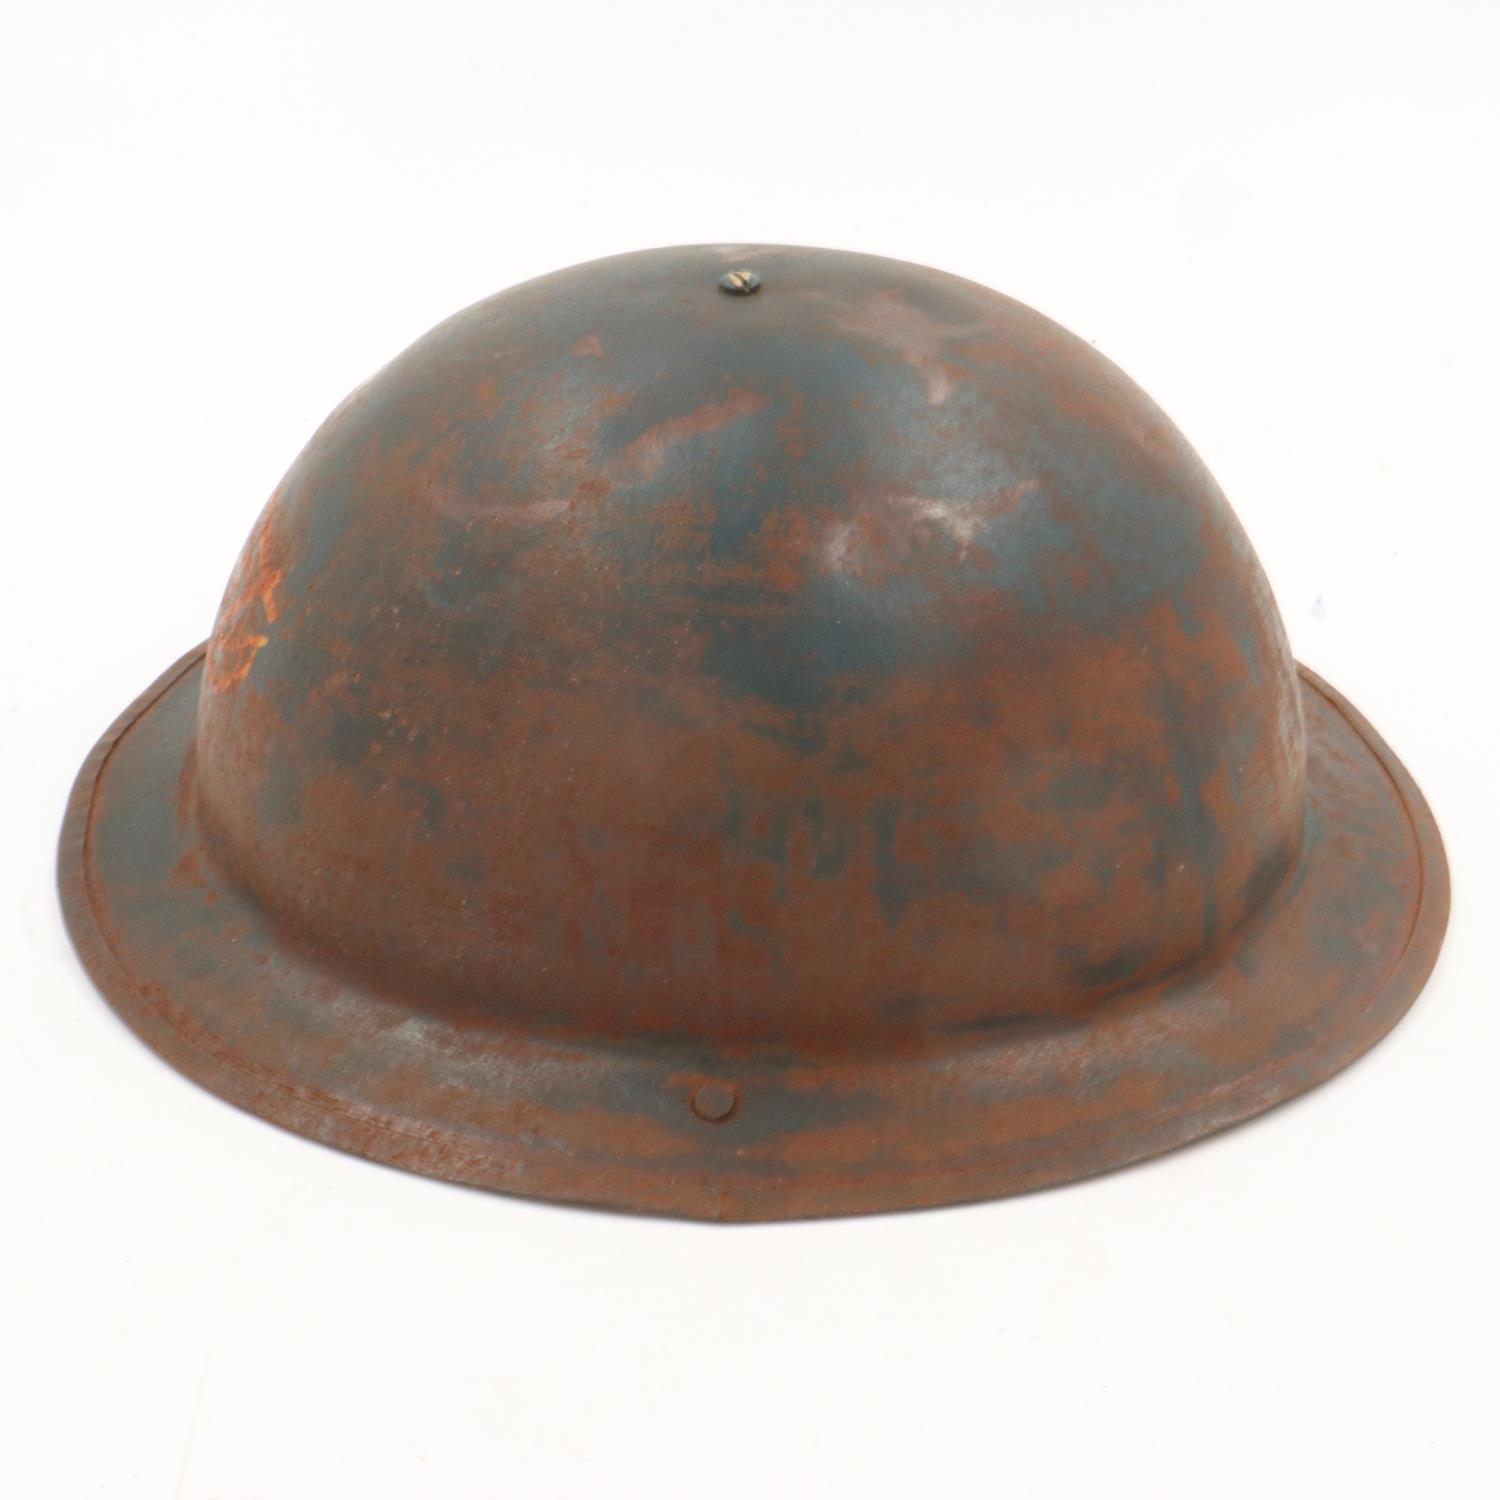 WWII British home front private purchase “Tin Bowler” Helmet for Boots the Chemist Staff. UK P&P - Image 2 of 5